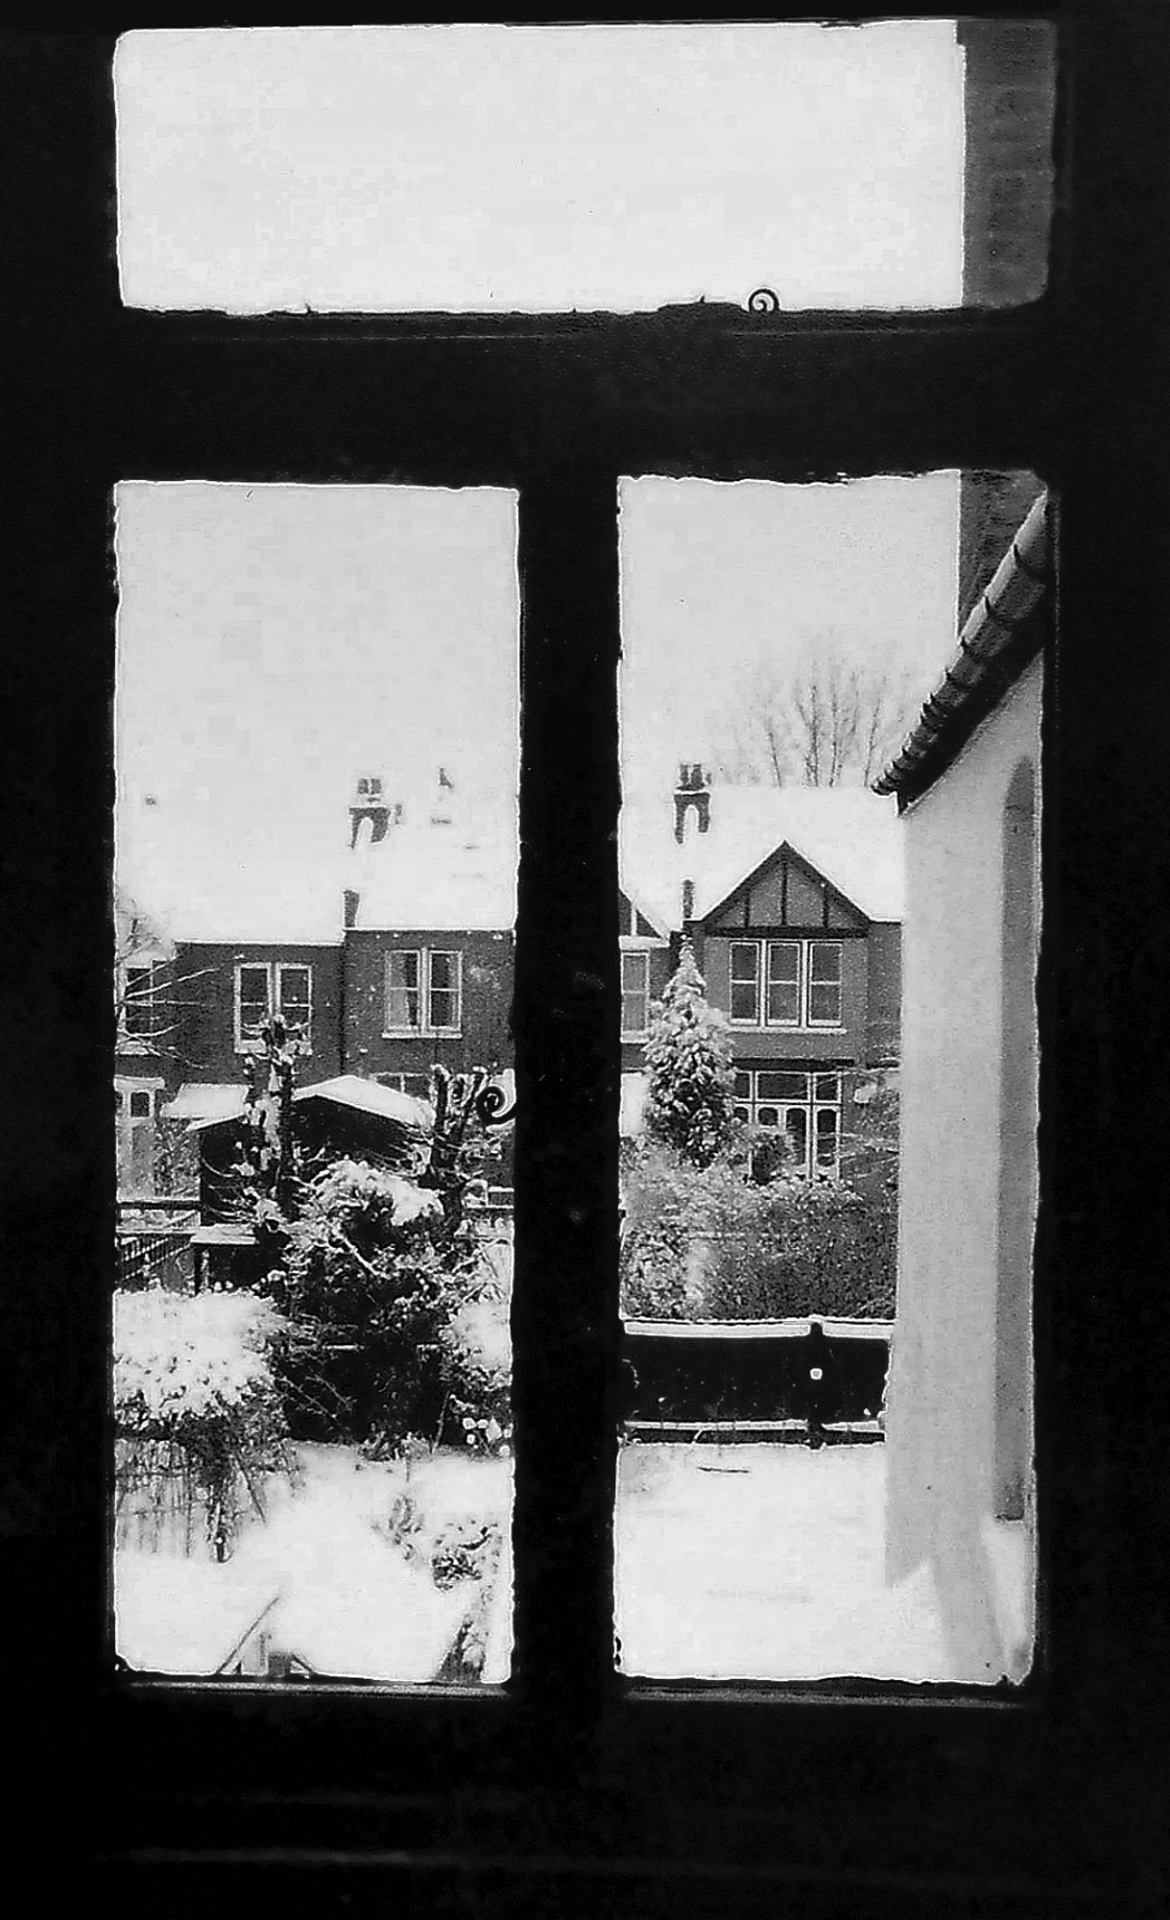 View from a suburban London window in the winter